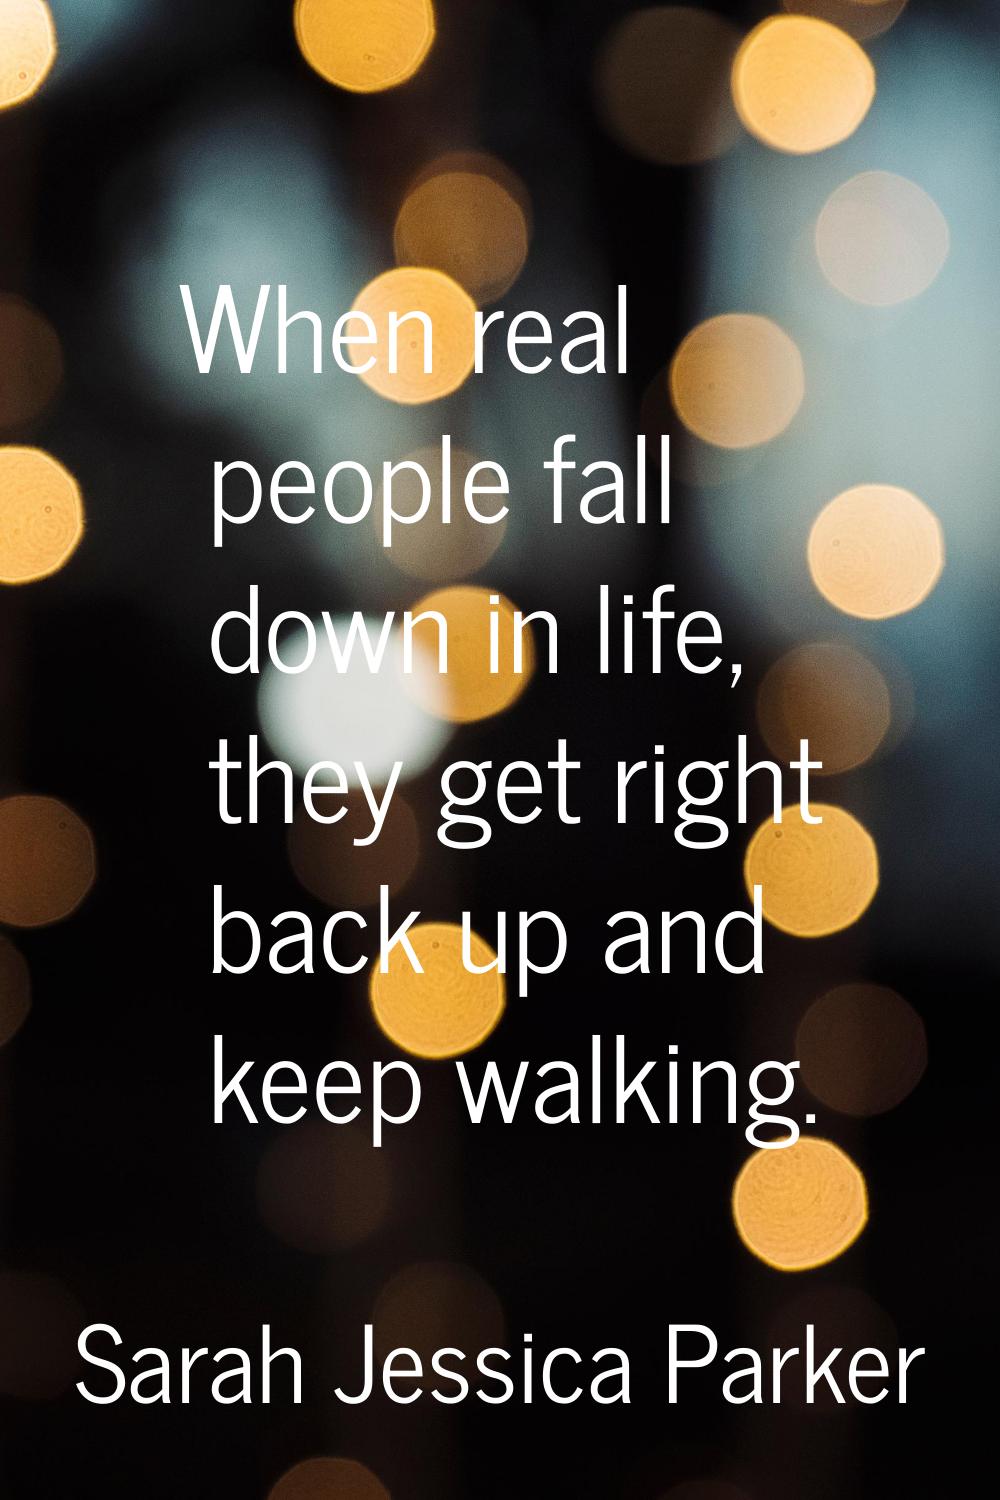 When real people fall down in life, they get right back up and keep walking.